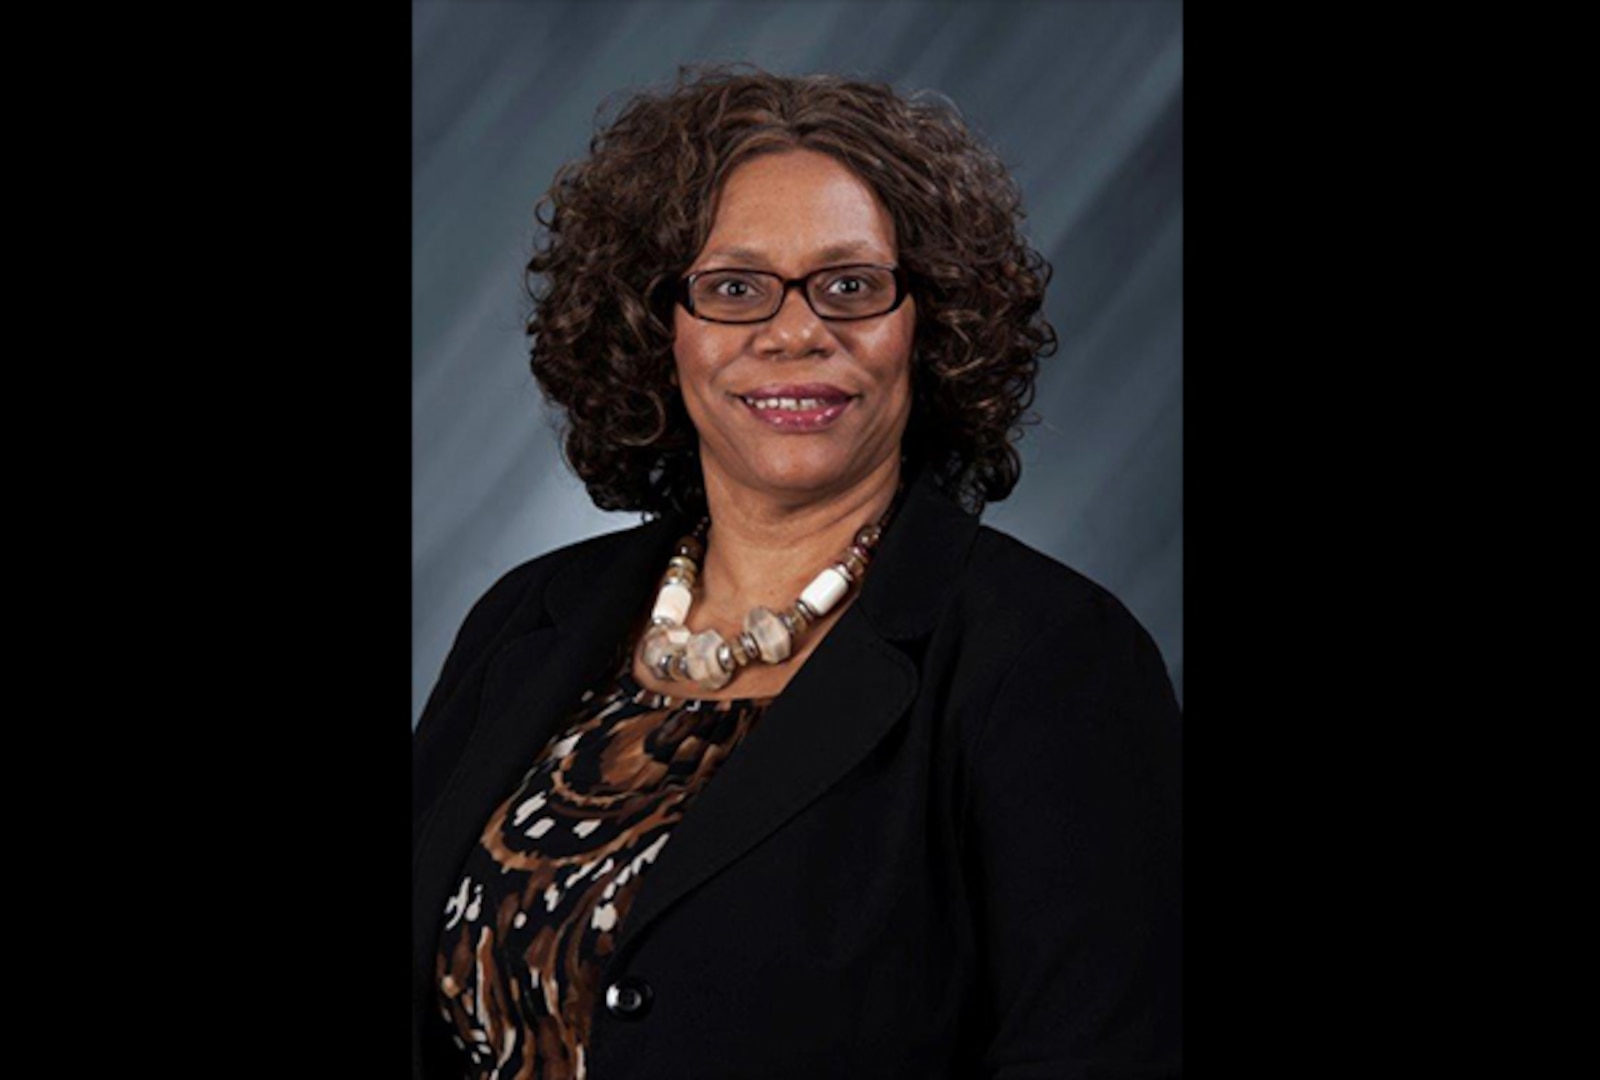 Debra Hobbs is a purchasing agent at DLA Land and Maritime